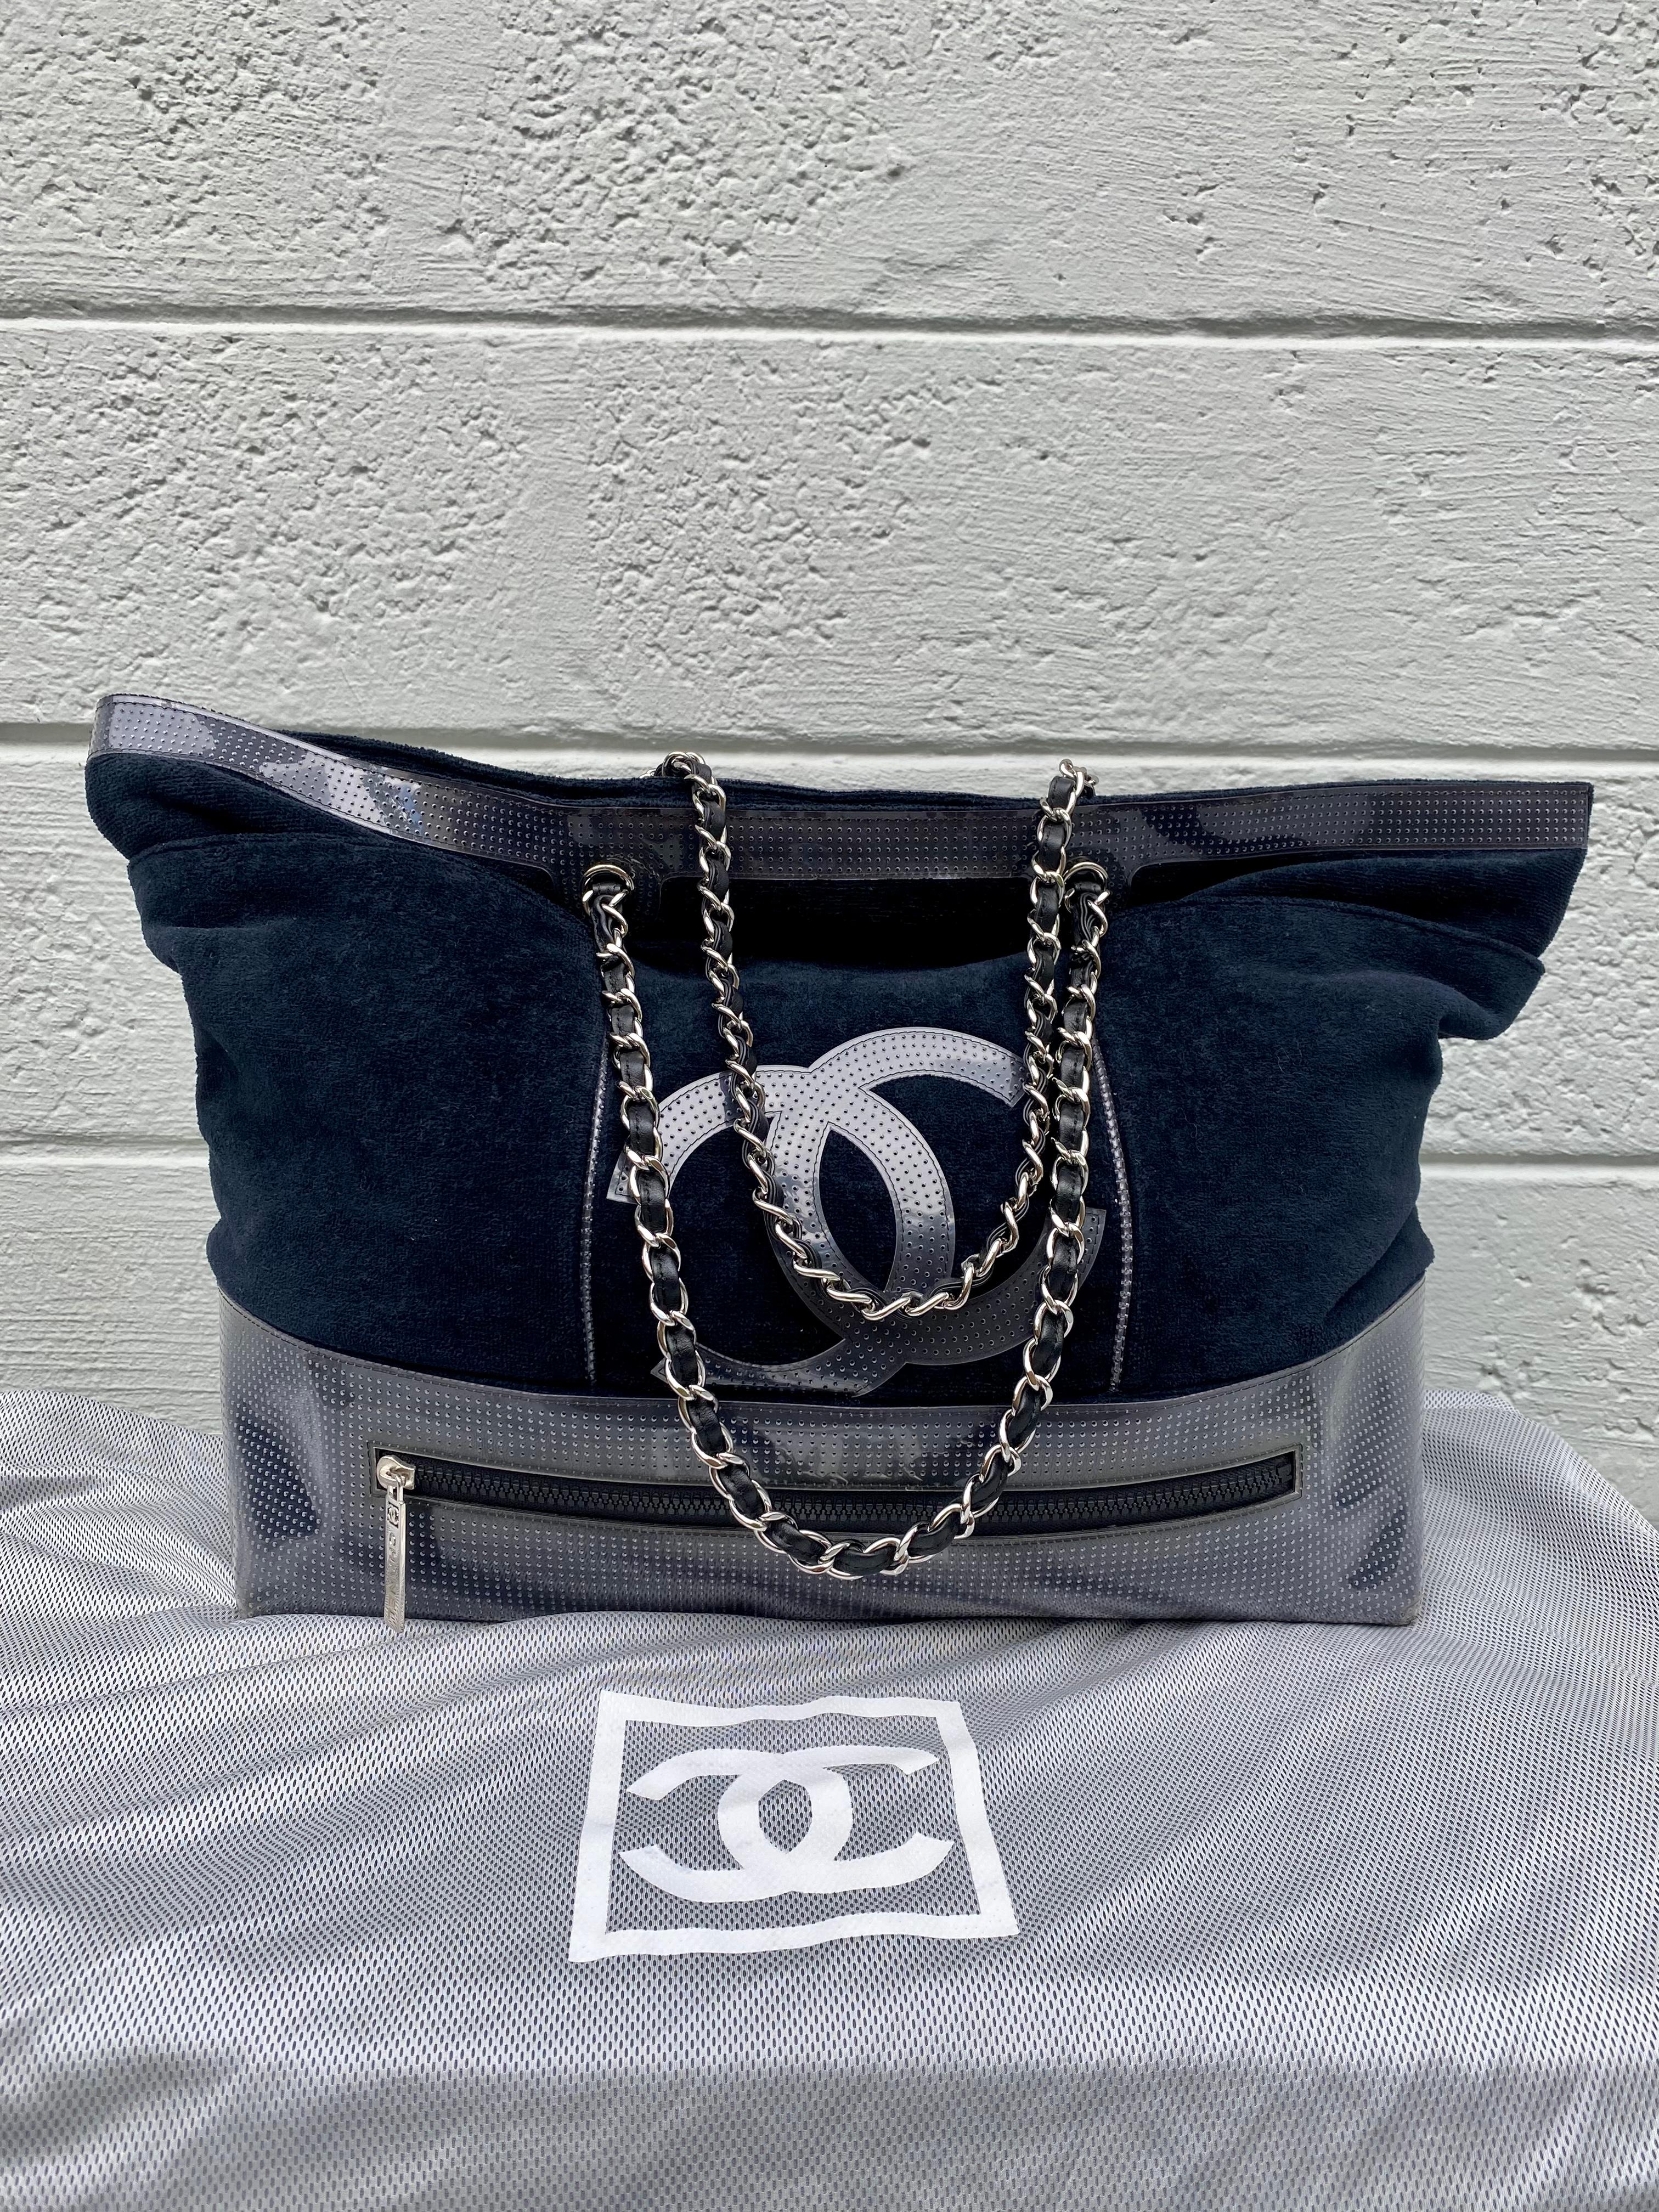 Vintage Rare Chanel Plush Terry Cloth Maxi Weekender Travel Beach Shopper Tote For Sale 13